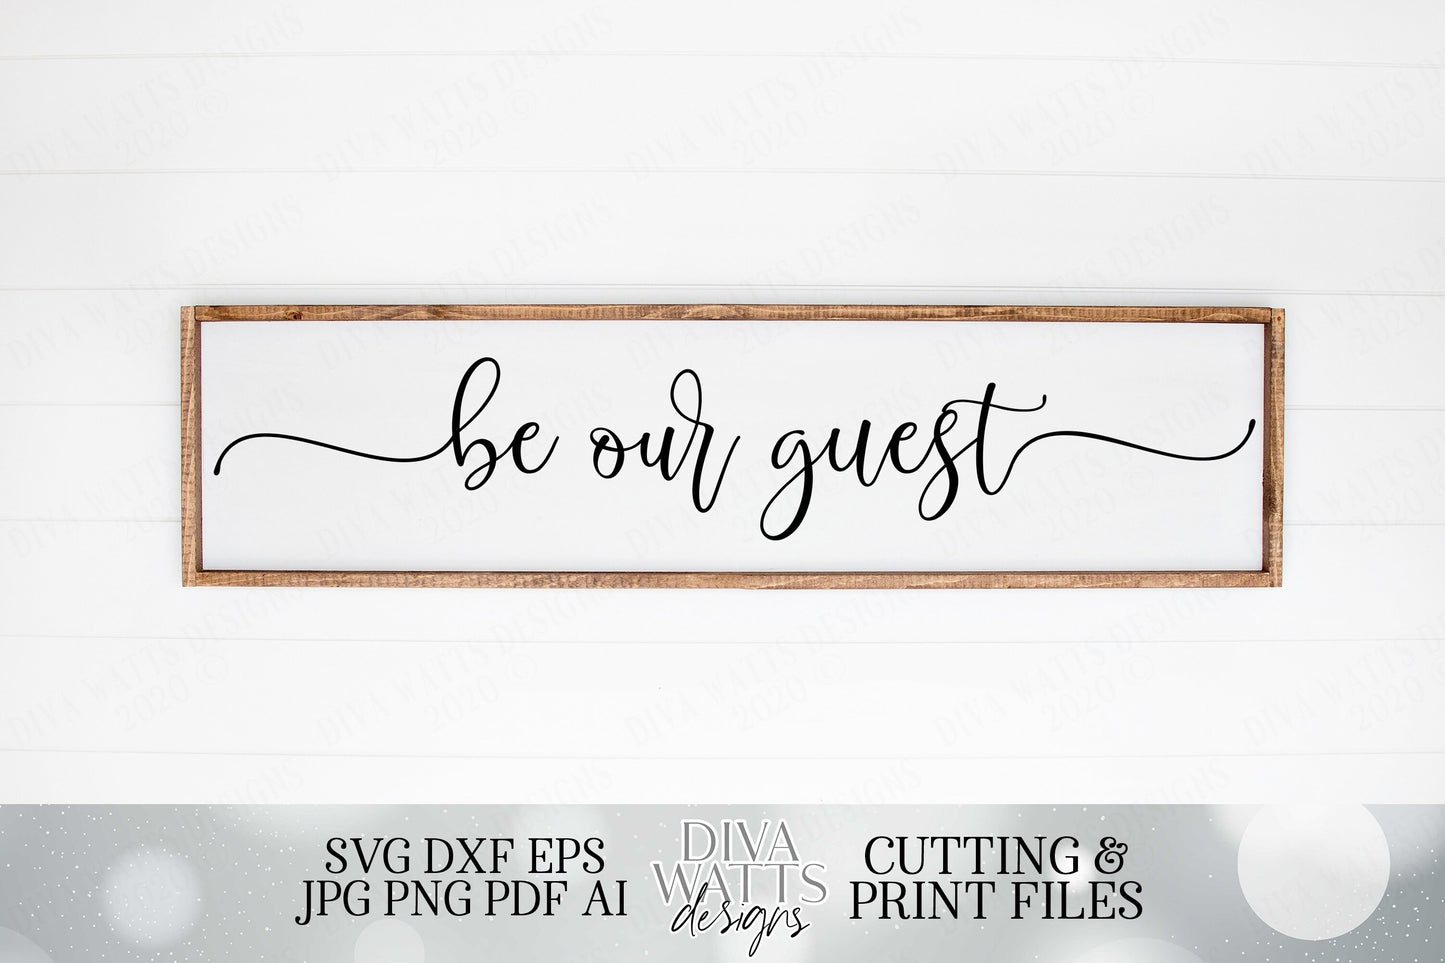 Be Our Guest | Farmhouse Sign | Cutting File and Printable | SVG DXF JPG and more